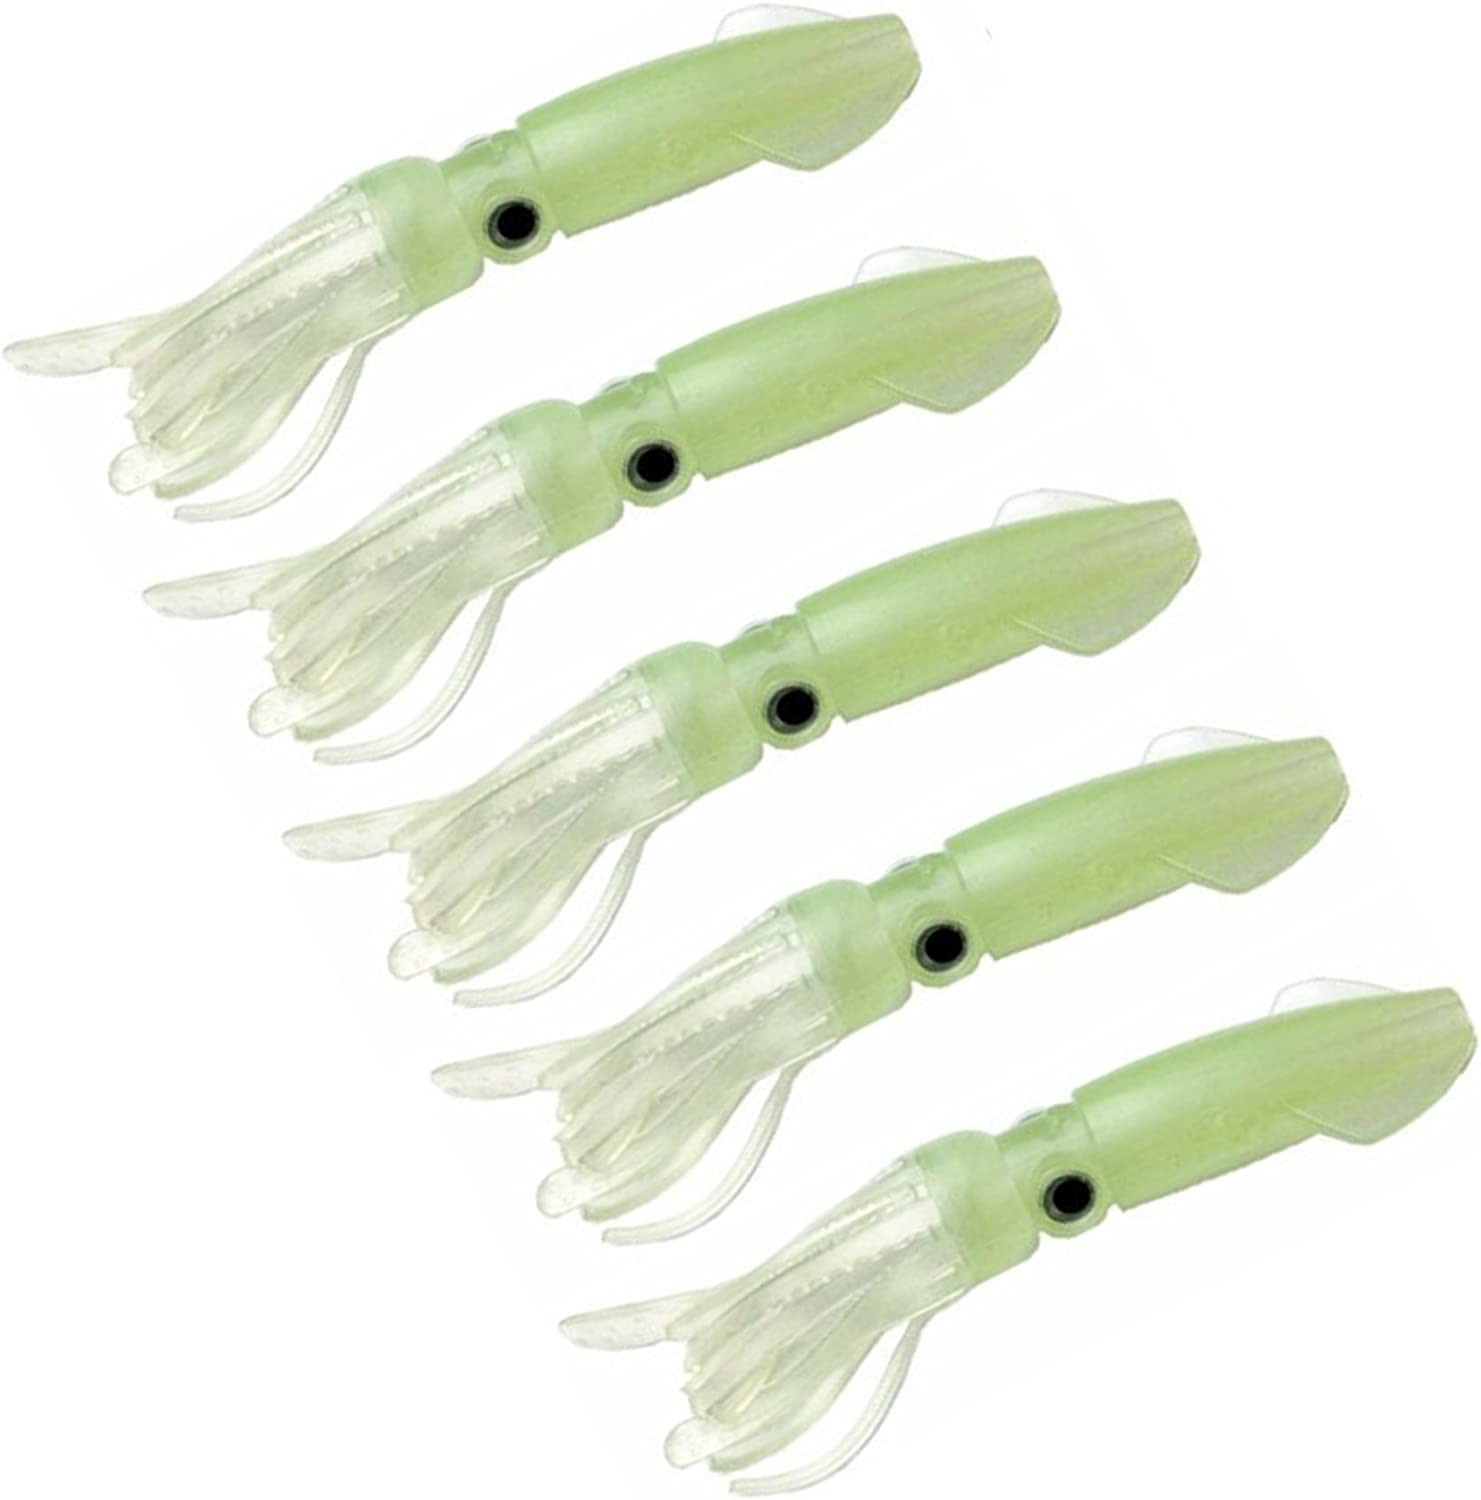  40pcs 15cm/6 inch Fishing Lures Squid Skirts Octopus Trolling  Soft Plastic Fishing Lures Bait Set : Sports & Outdoors